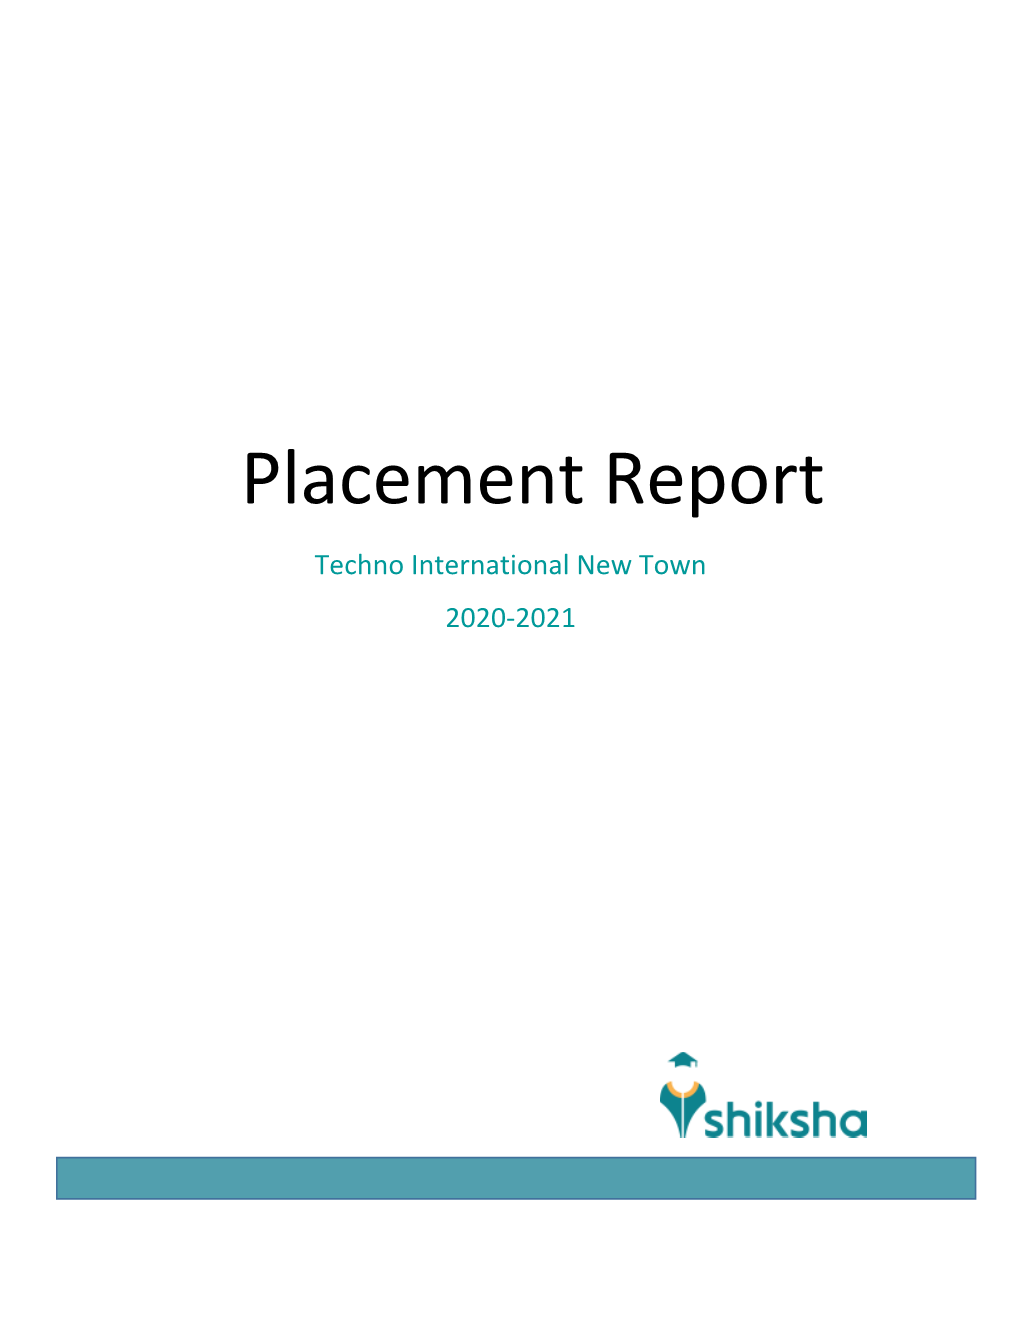 Placement Report Techno International New Town 2020-2021